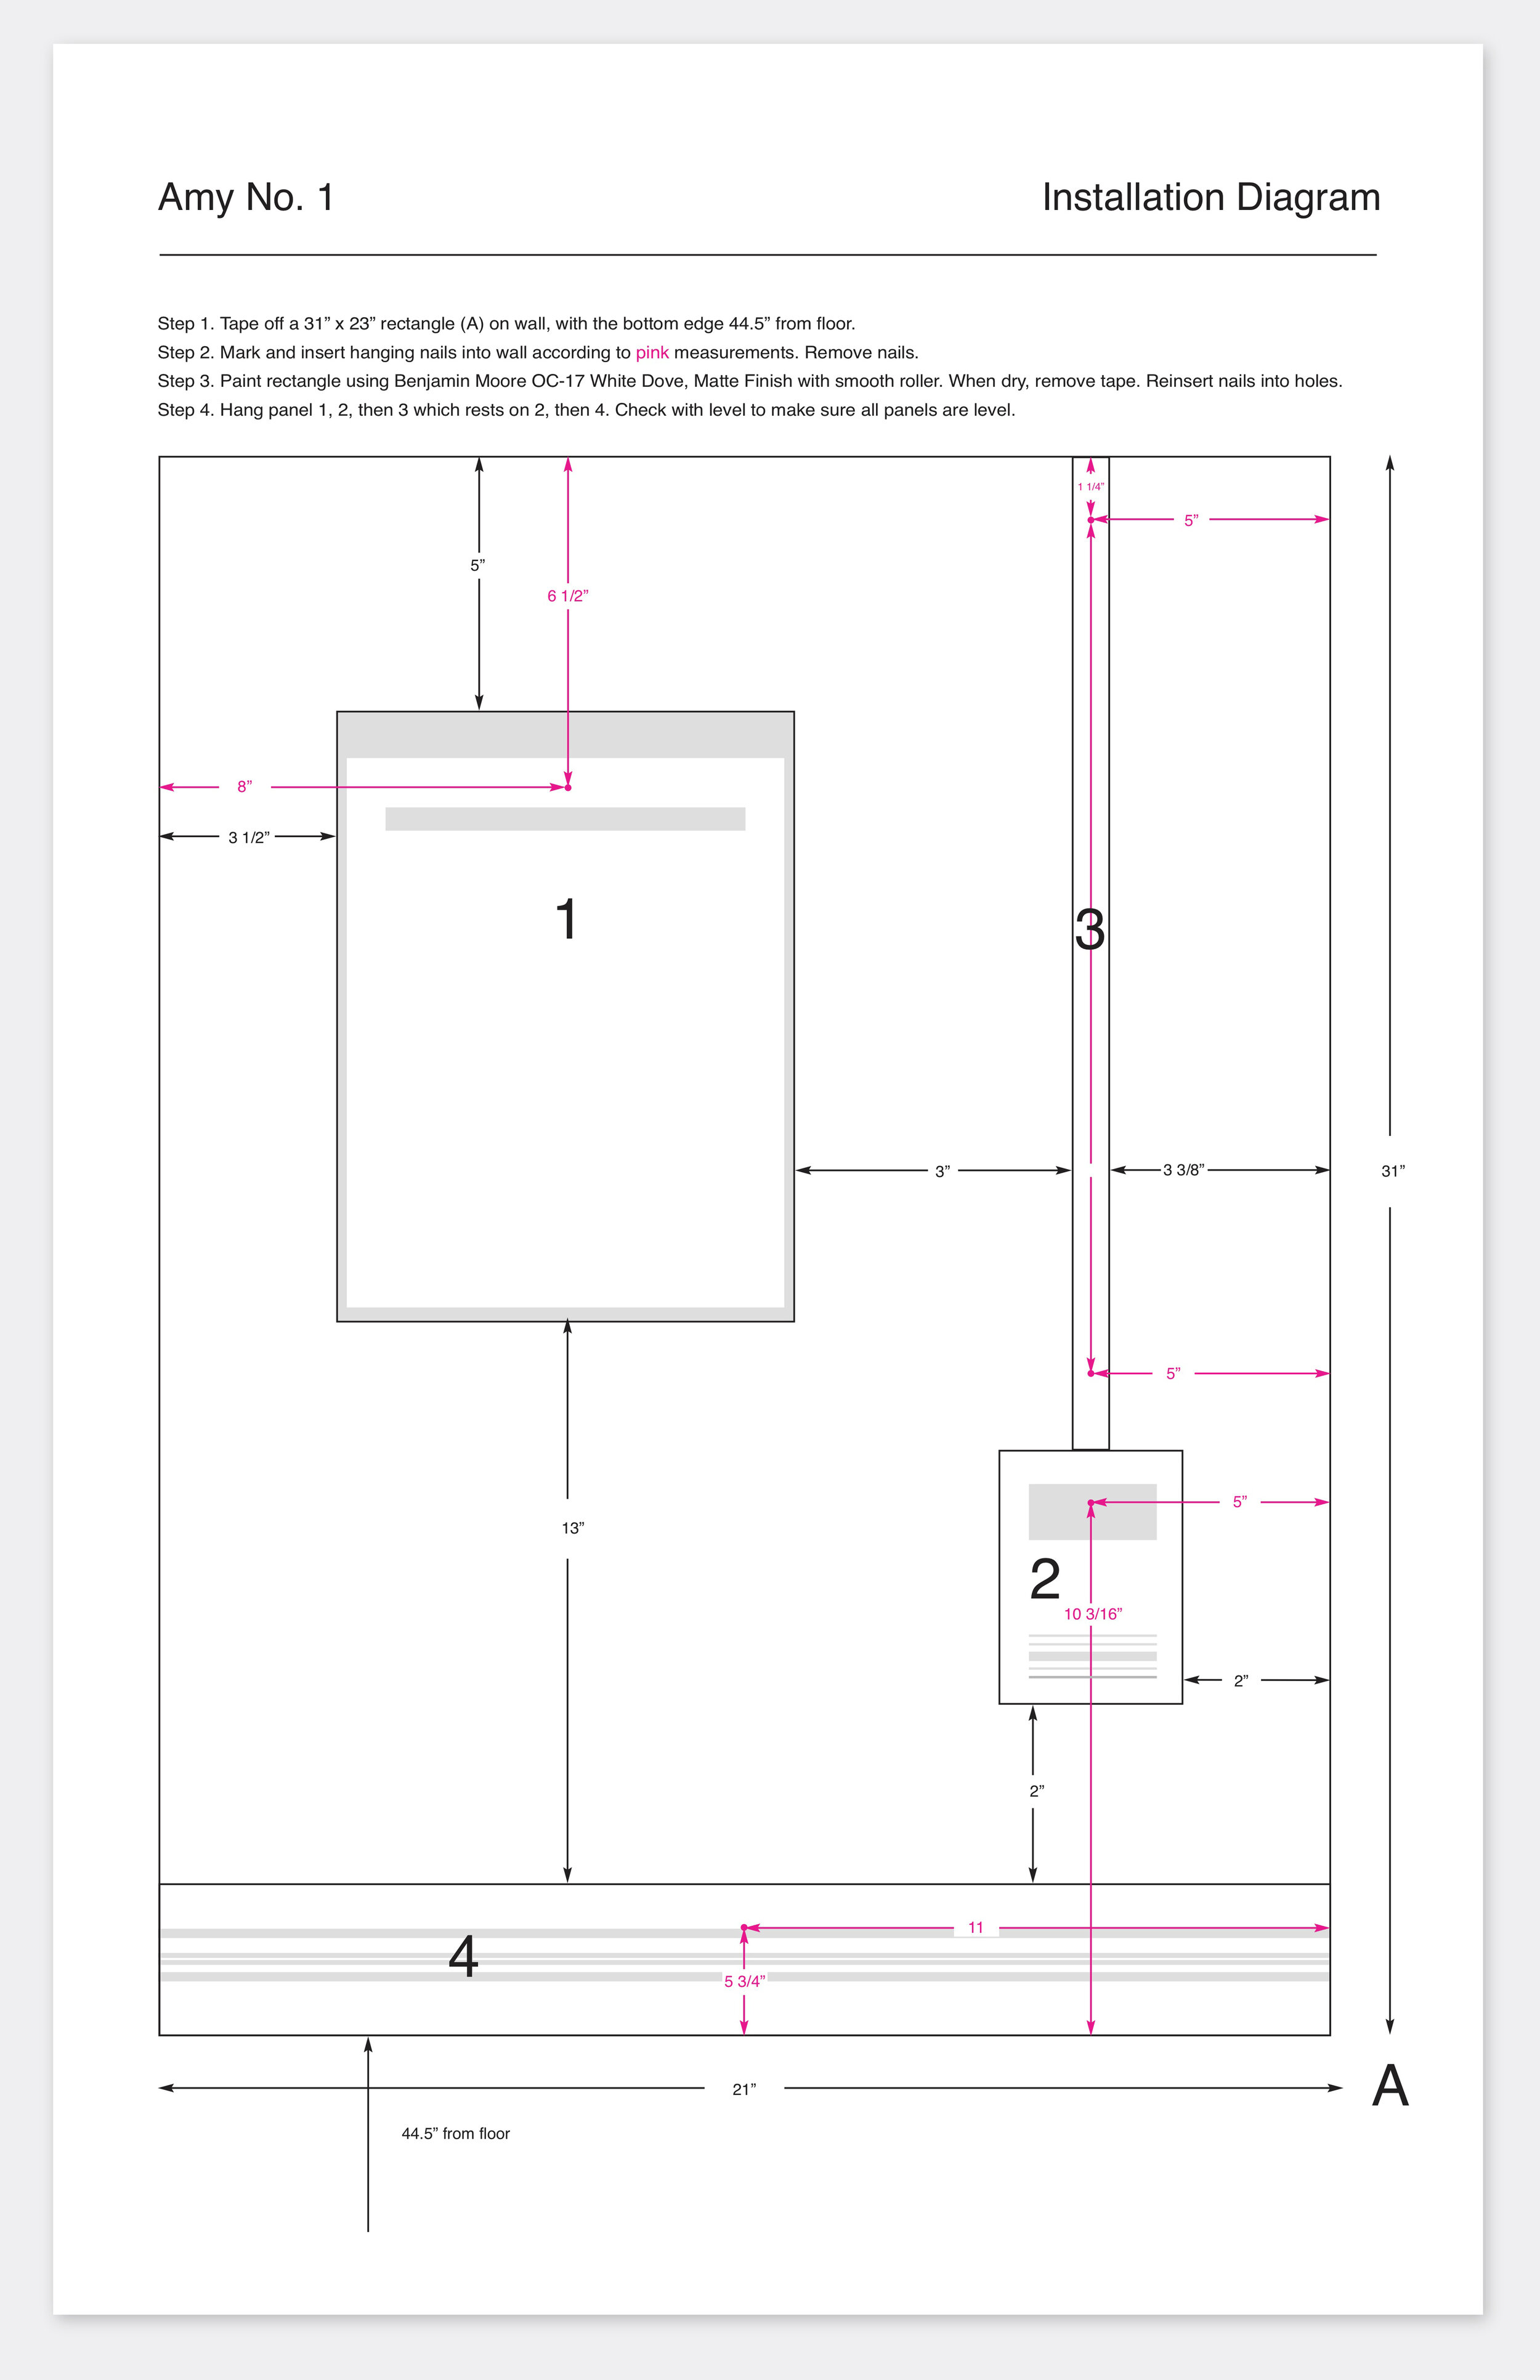  Installation Diagram for  Amy No. 1  2021, 17” x 11”. Digital print.  This plan accompanies the artwork and specifies the color and parameters of a rectangle to be painted on the wall. It also dictates the precise locations of the four oil painting 